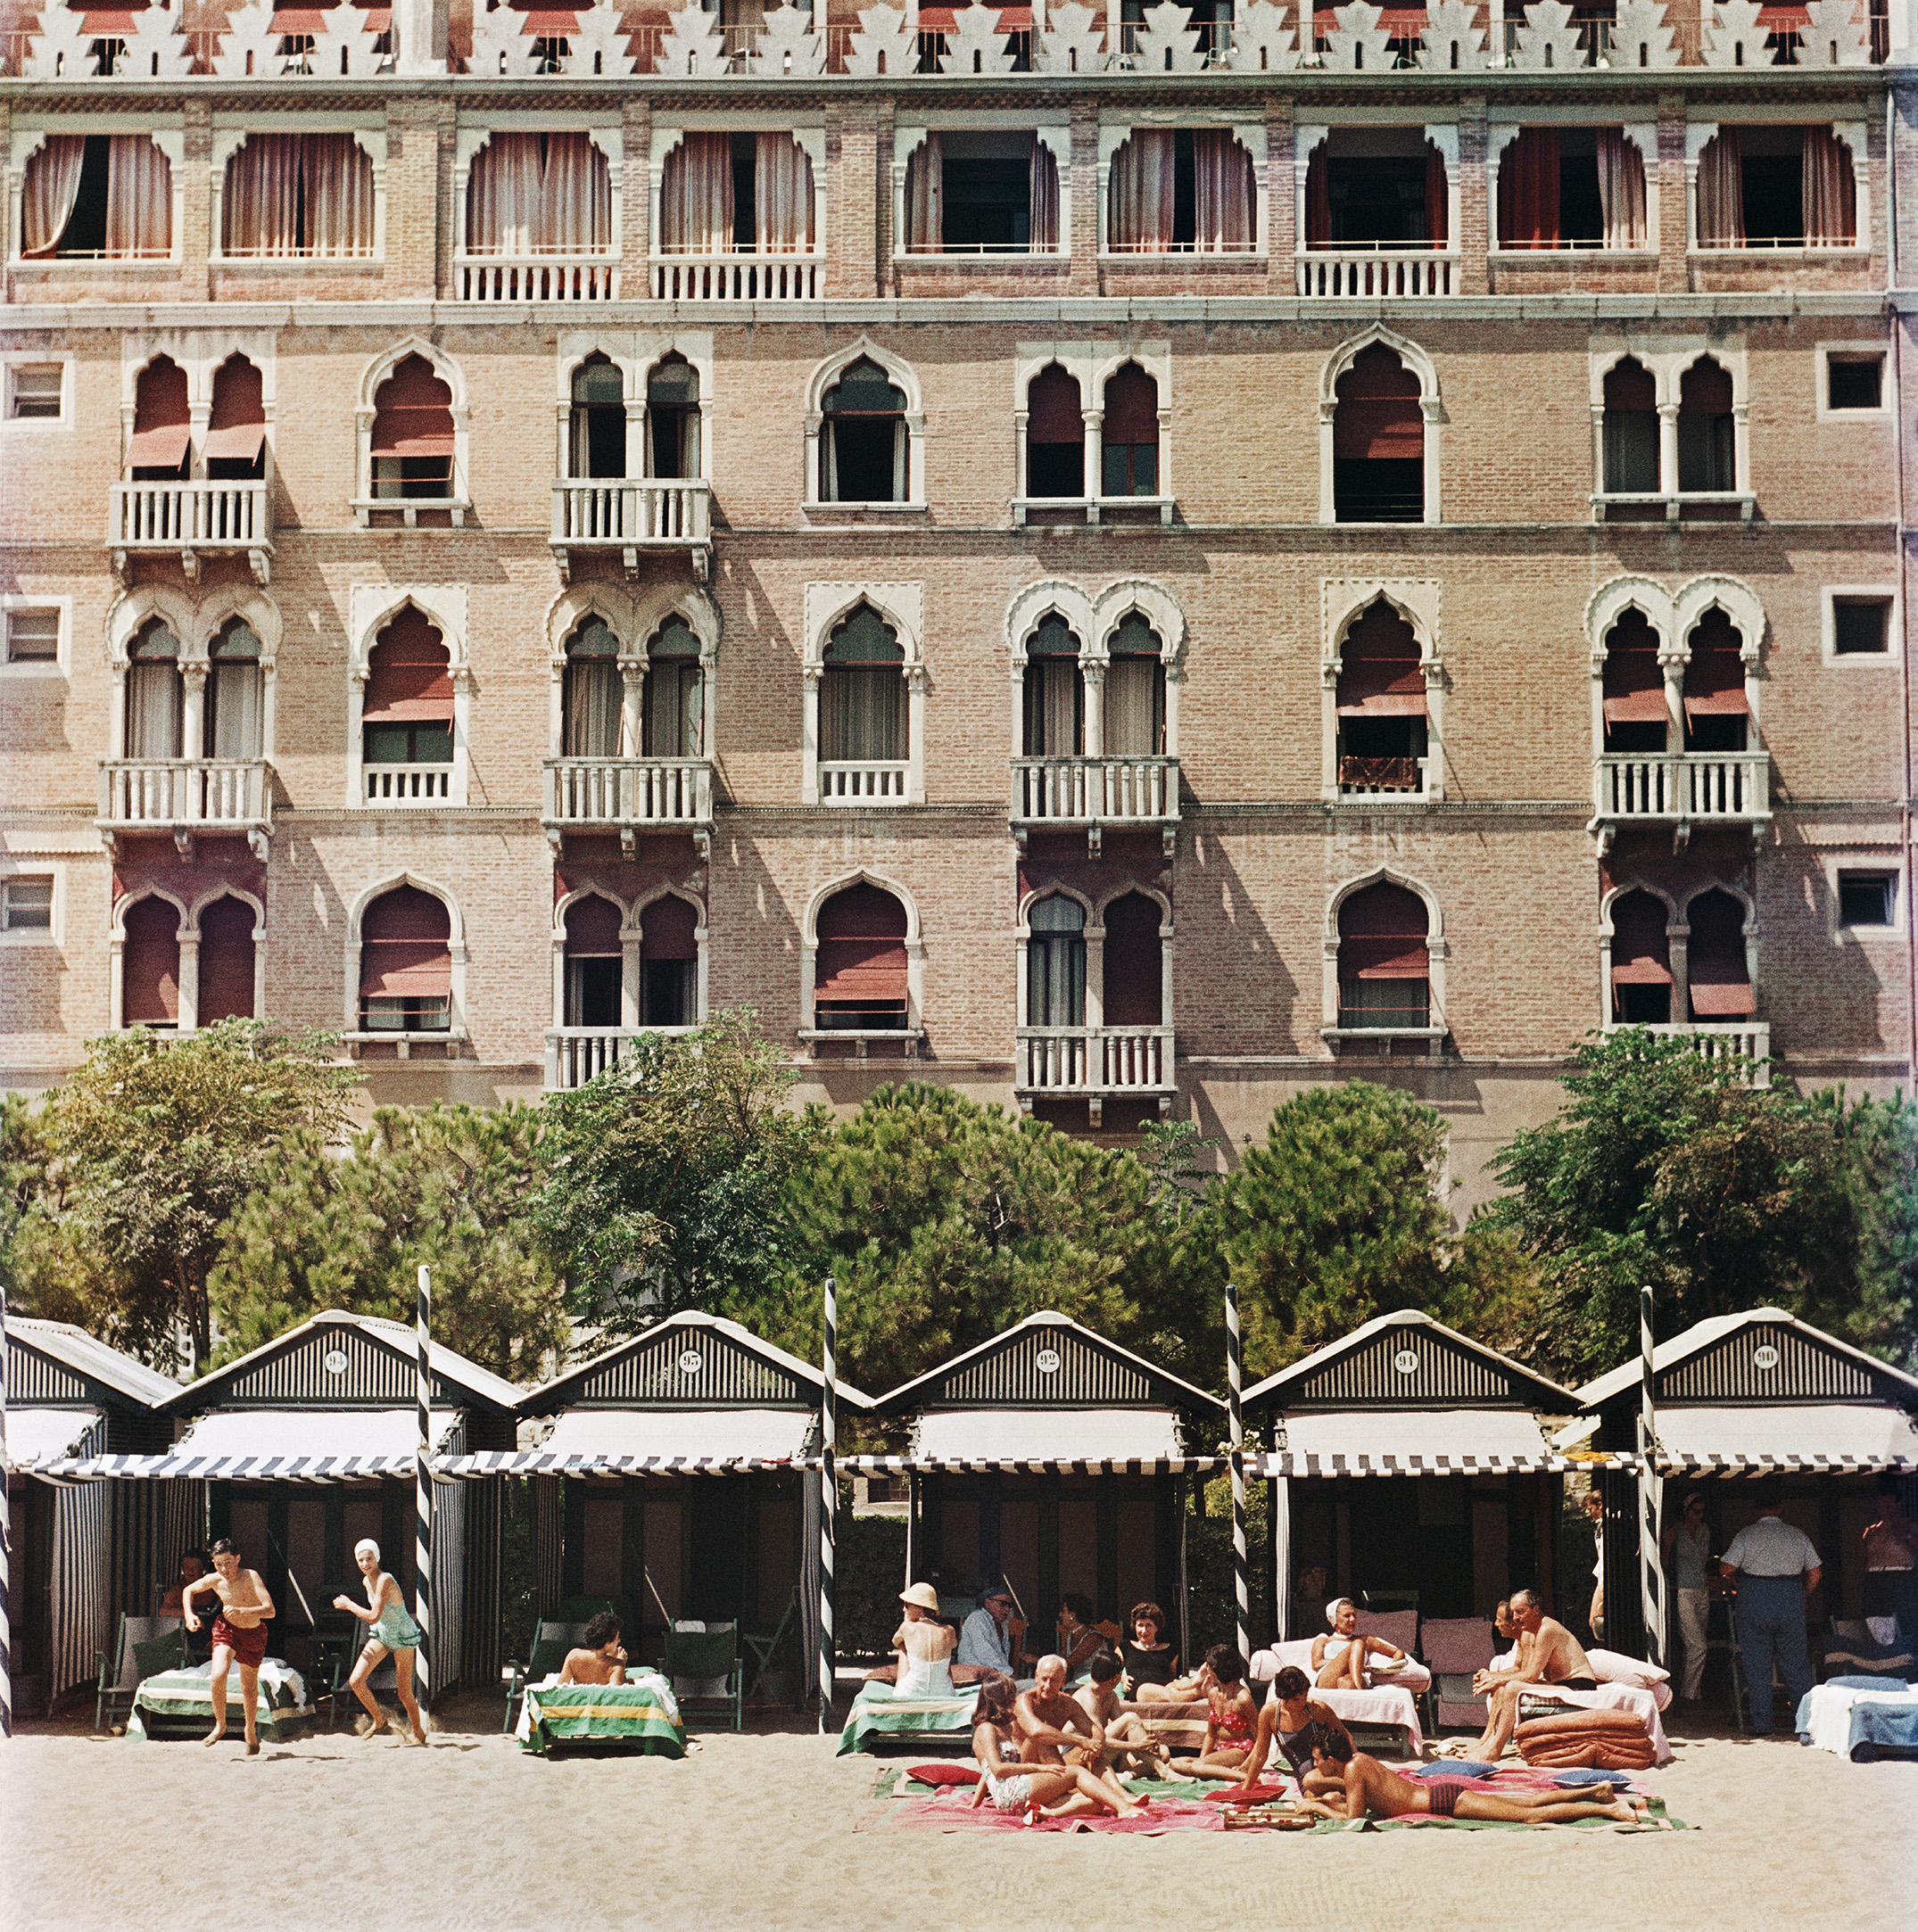 Slim Aarons
Hotel Excelsior, Venice
1957
C-Print
Estate signature stamped and hand numbered edition of 150 with certificate of authenticity from the Slim Aarons estate

CAPTION: The Westin Excelsior Hotel on the Lido in Venice, 1957. (Photo by Slim